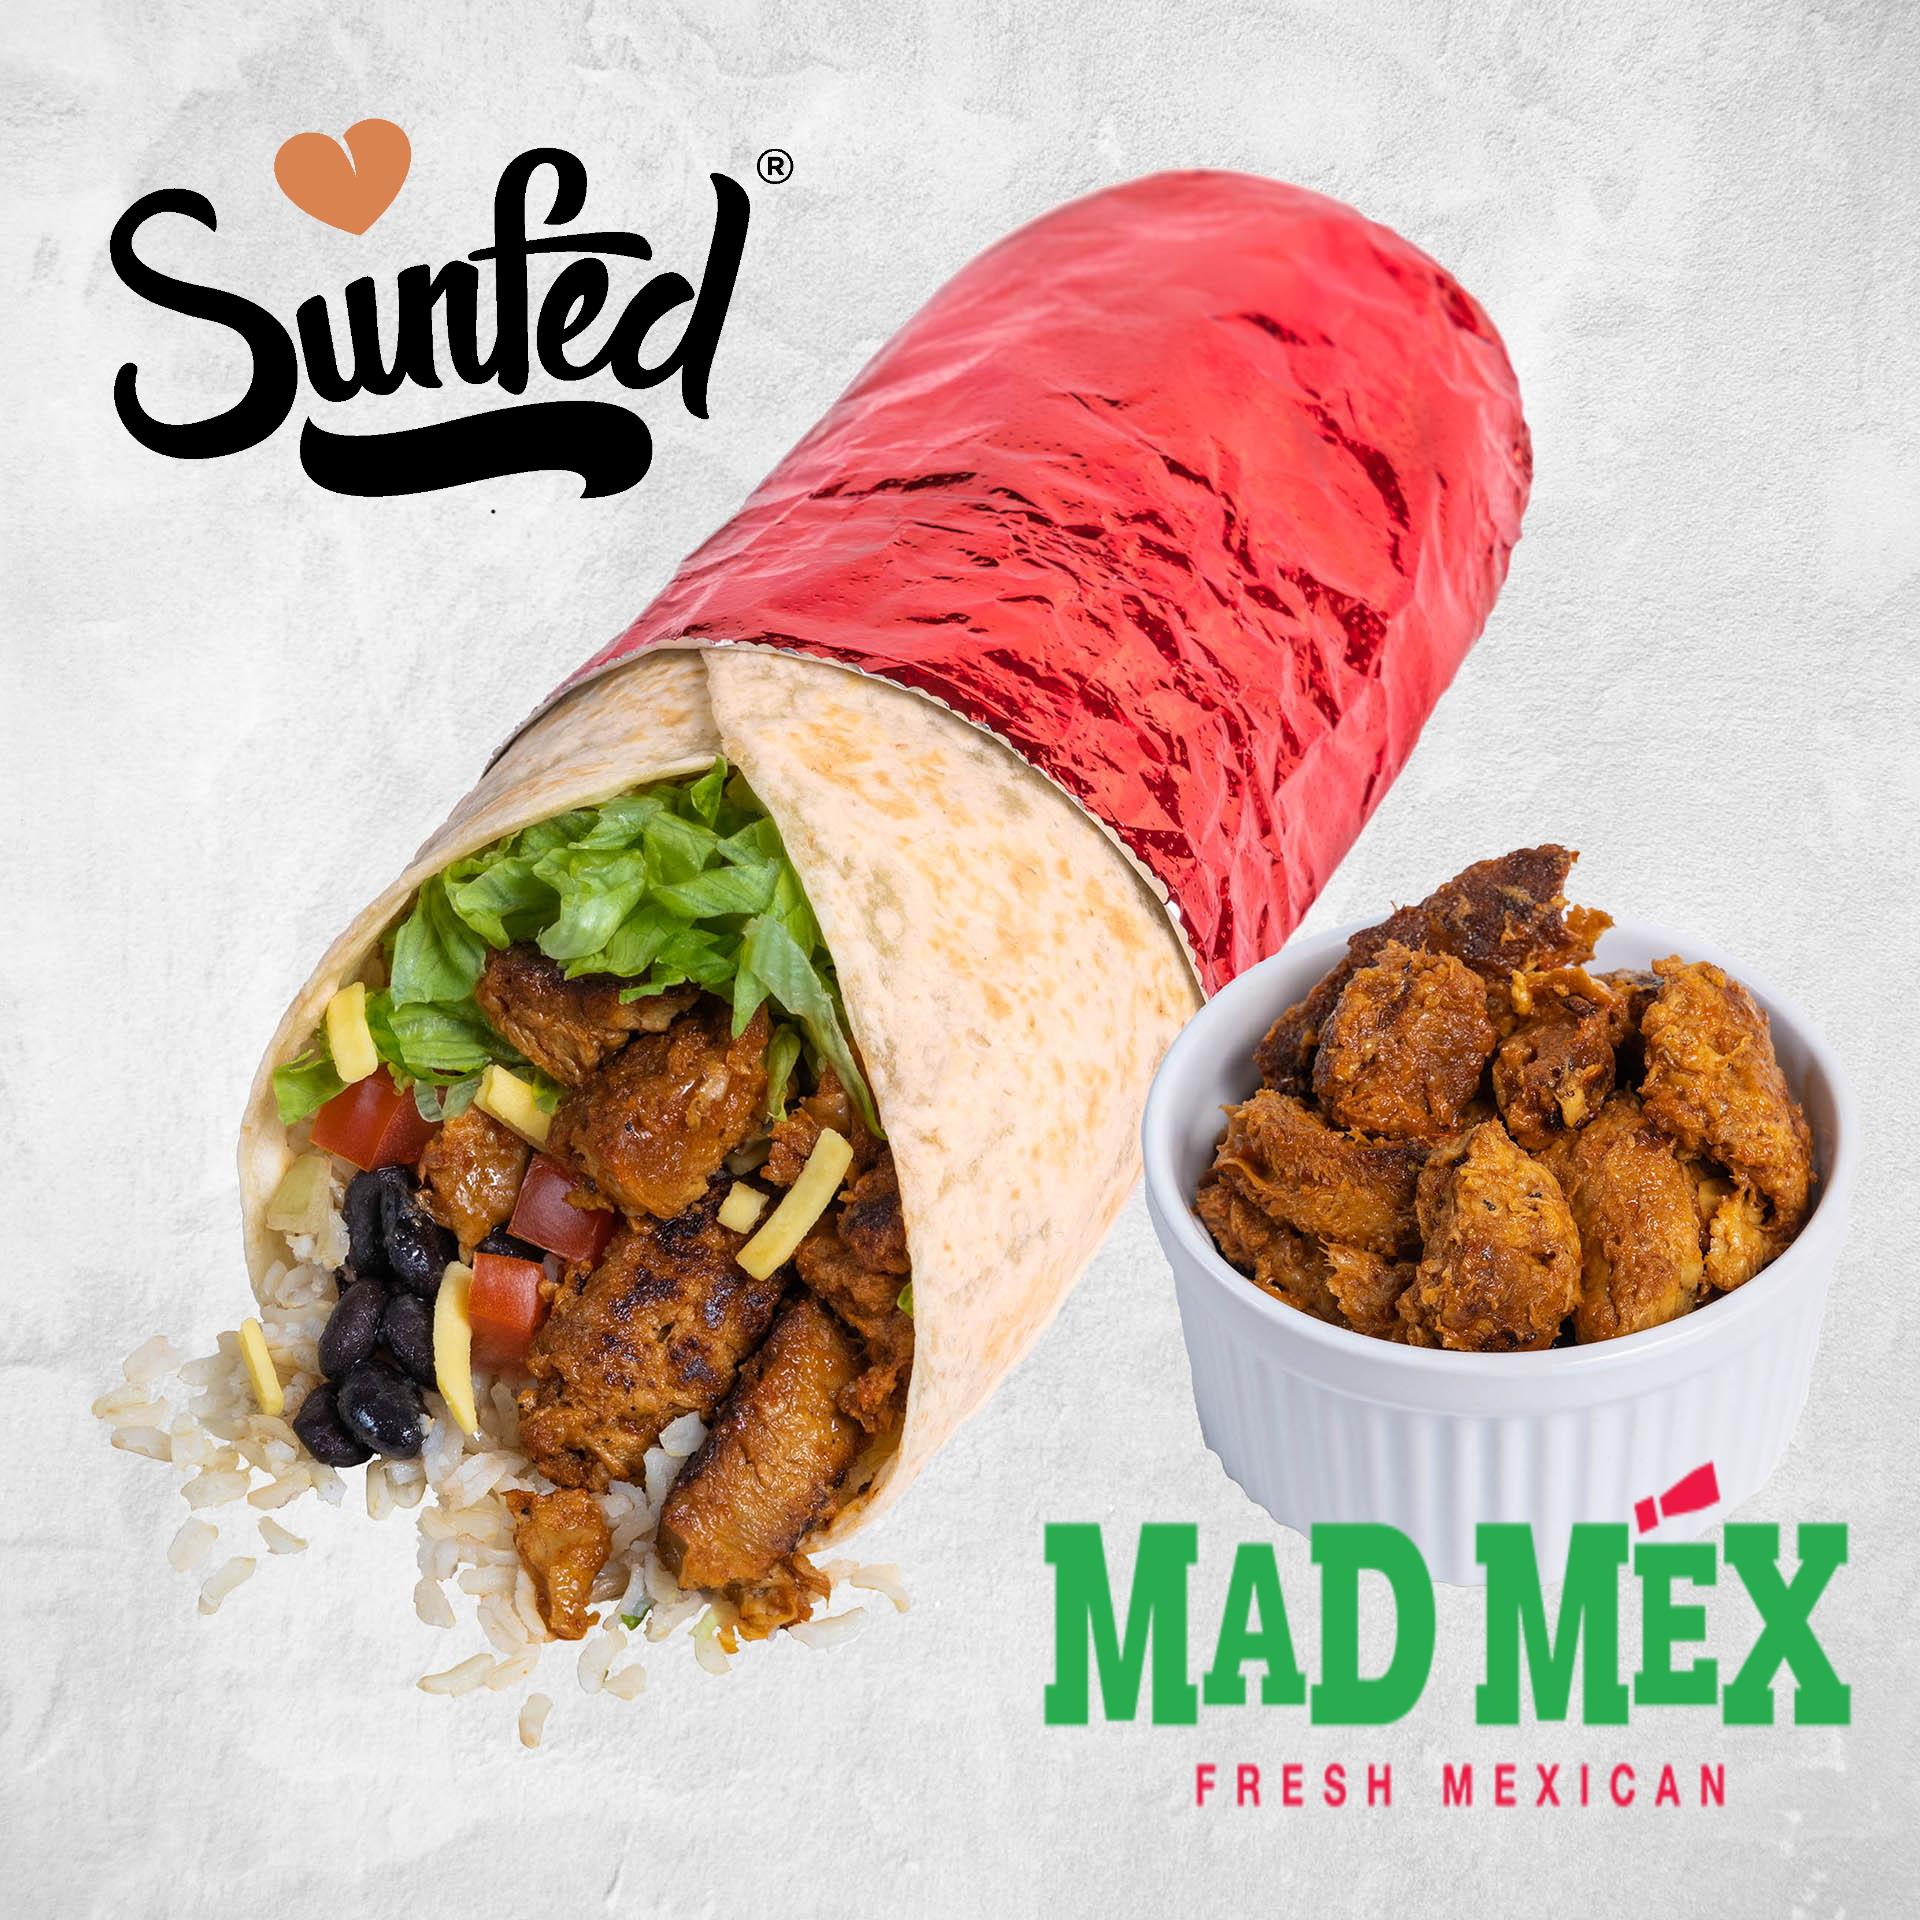 Mad Mex NZ introduces plant-based Sunfed Meats as protein option